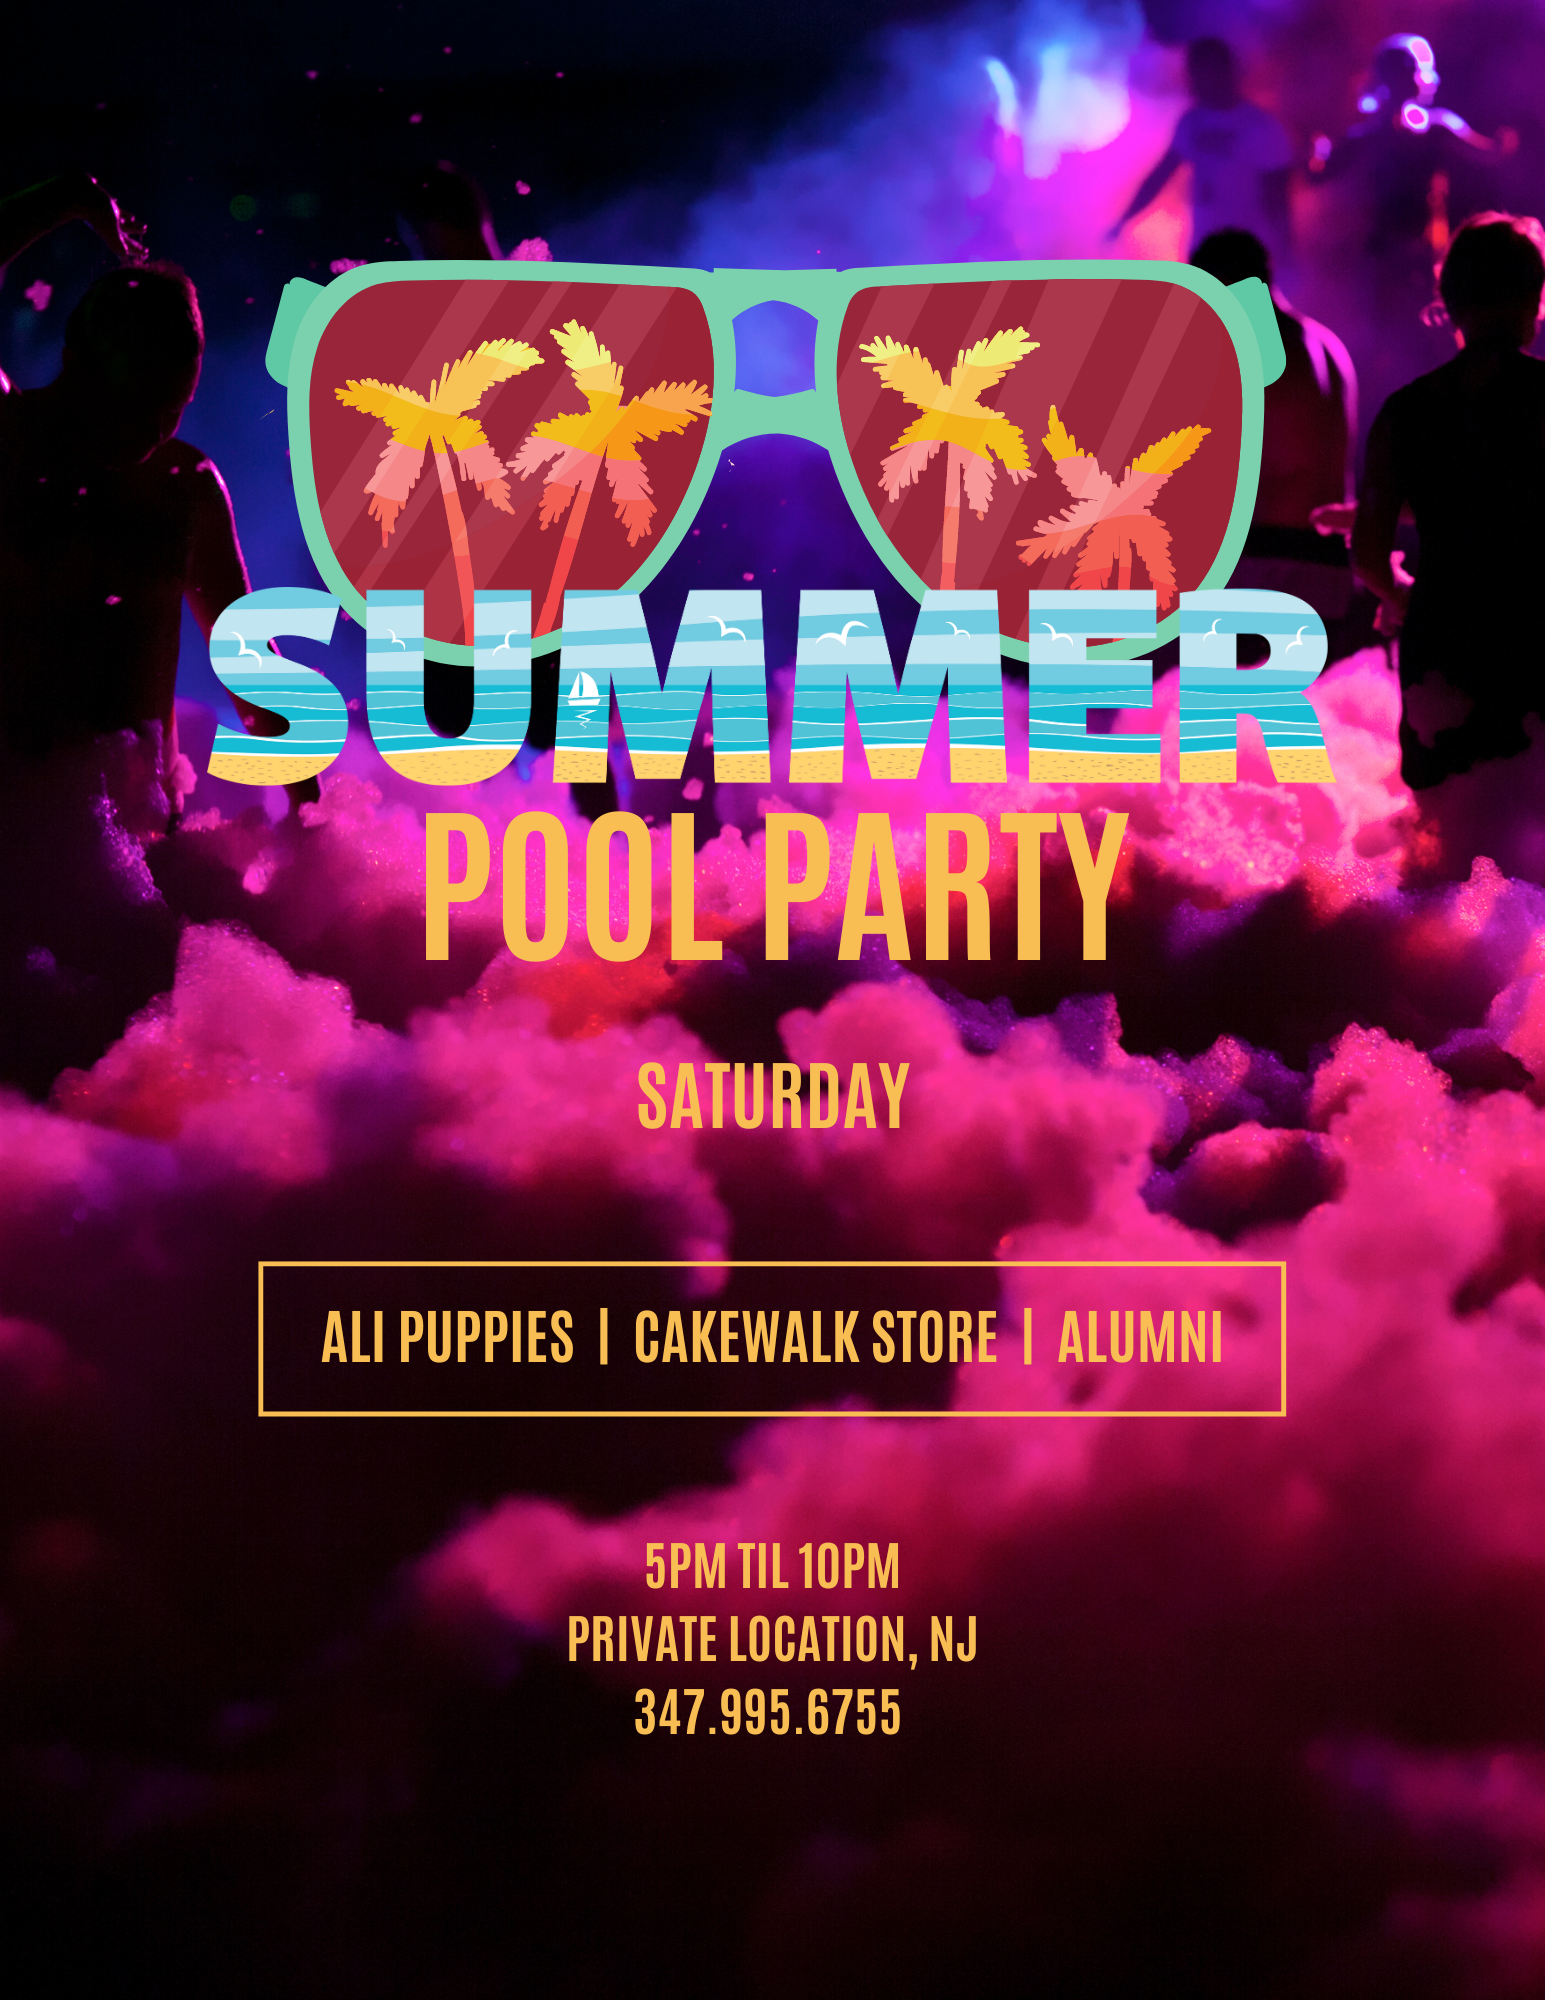 POOL PARTY SATURDAY Tickets $40